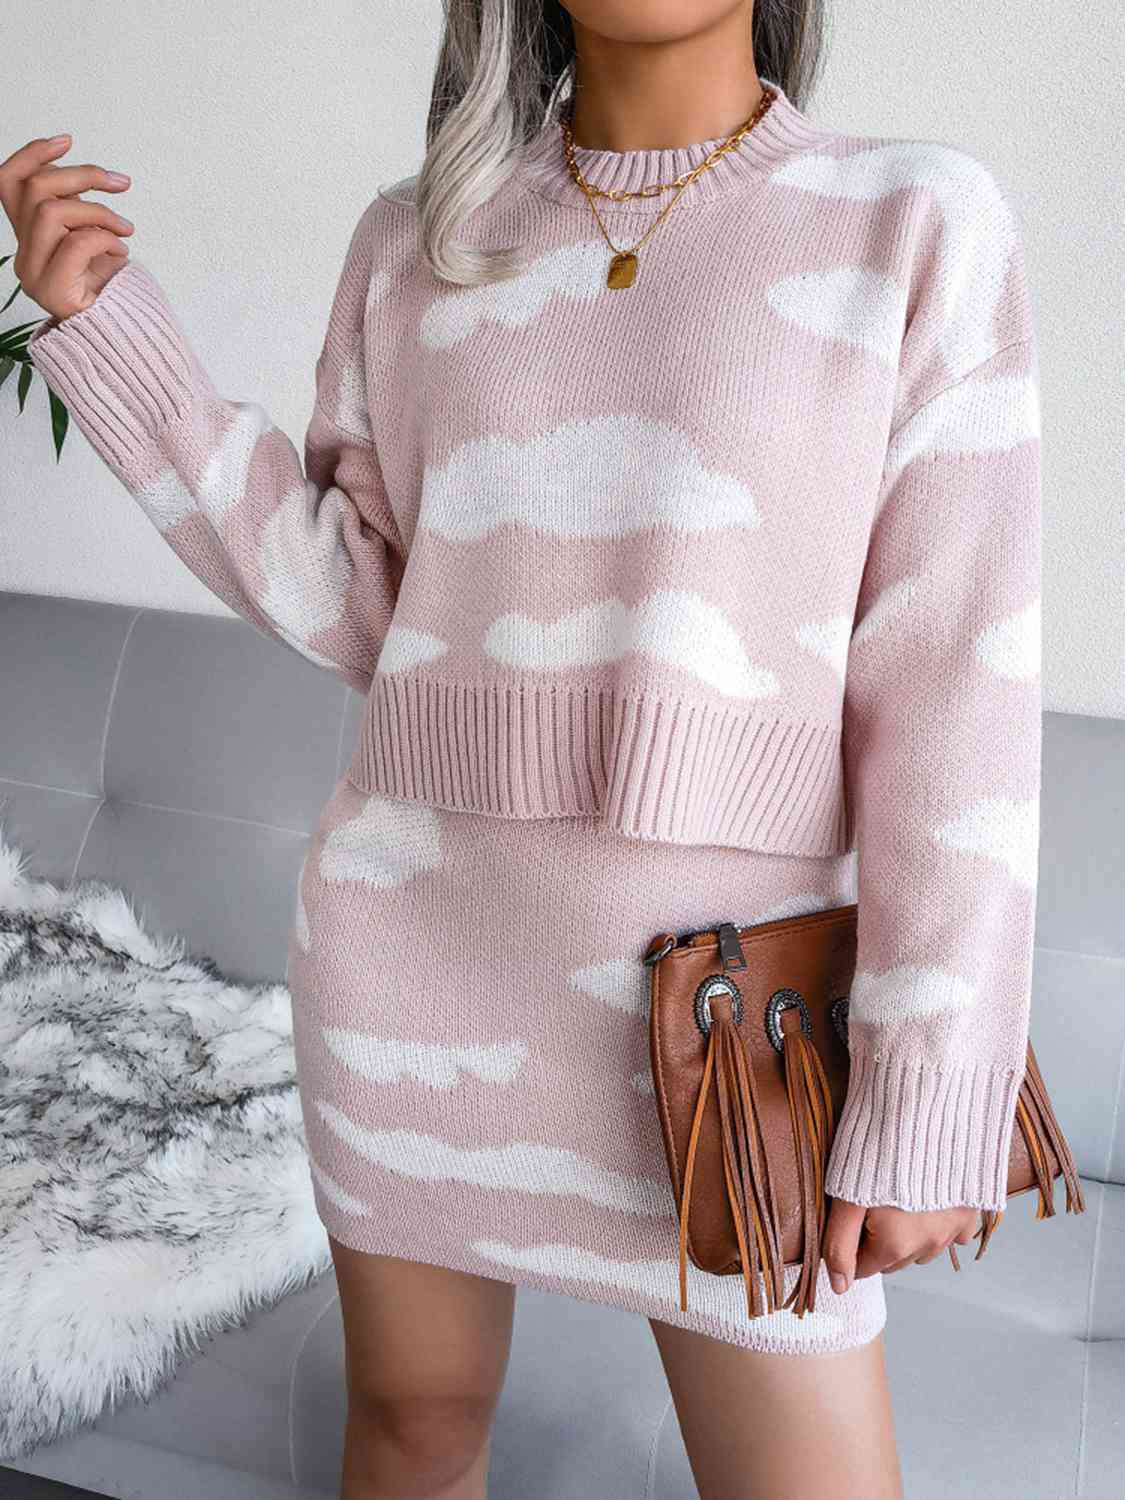 Cloud-Kissed Dreams Knitted Two-Piece Set